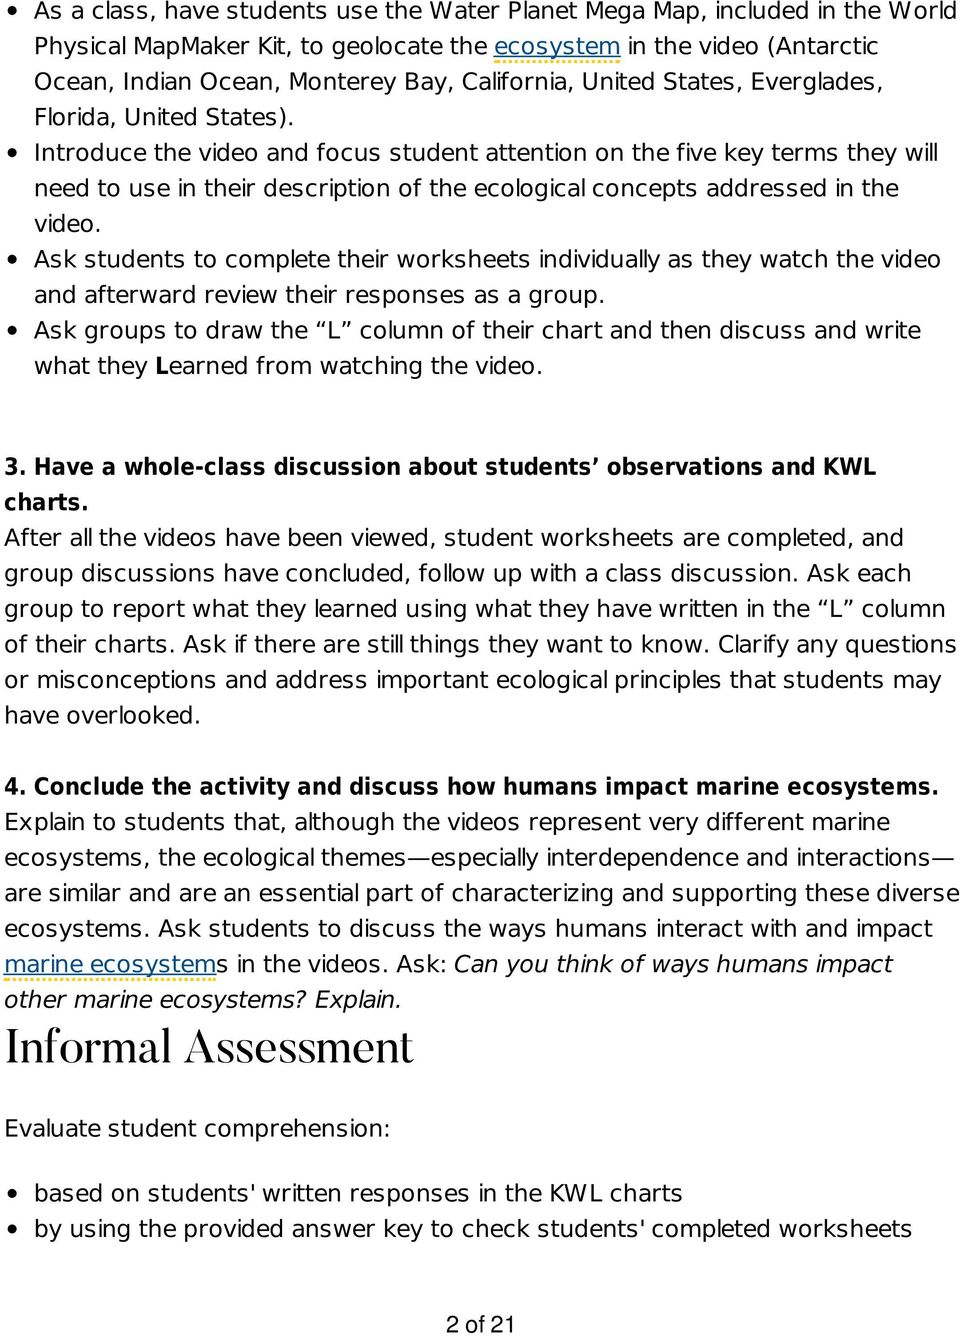 Introduce the video and focus student attention on the five key terms they will need to use in their description of the ecological concepts addressed in the video.